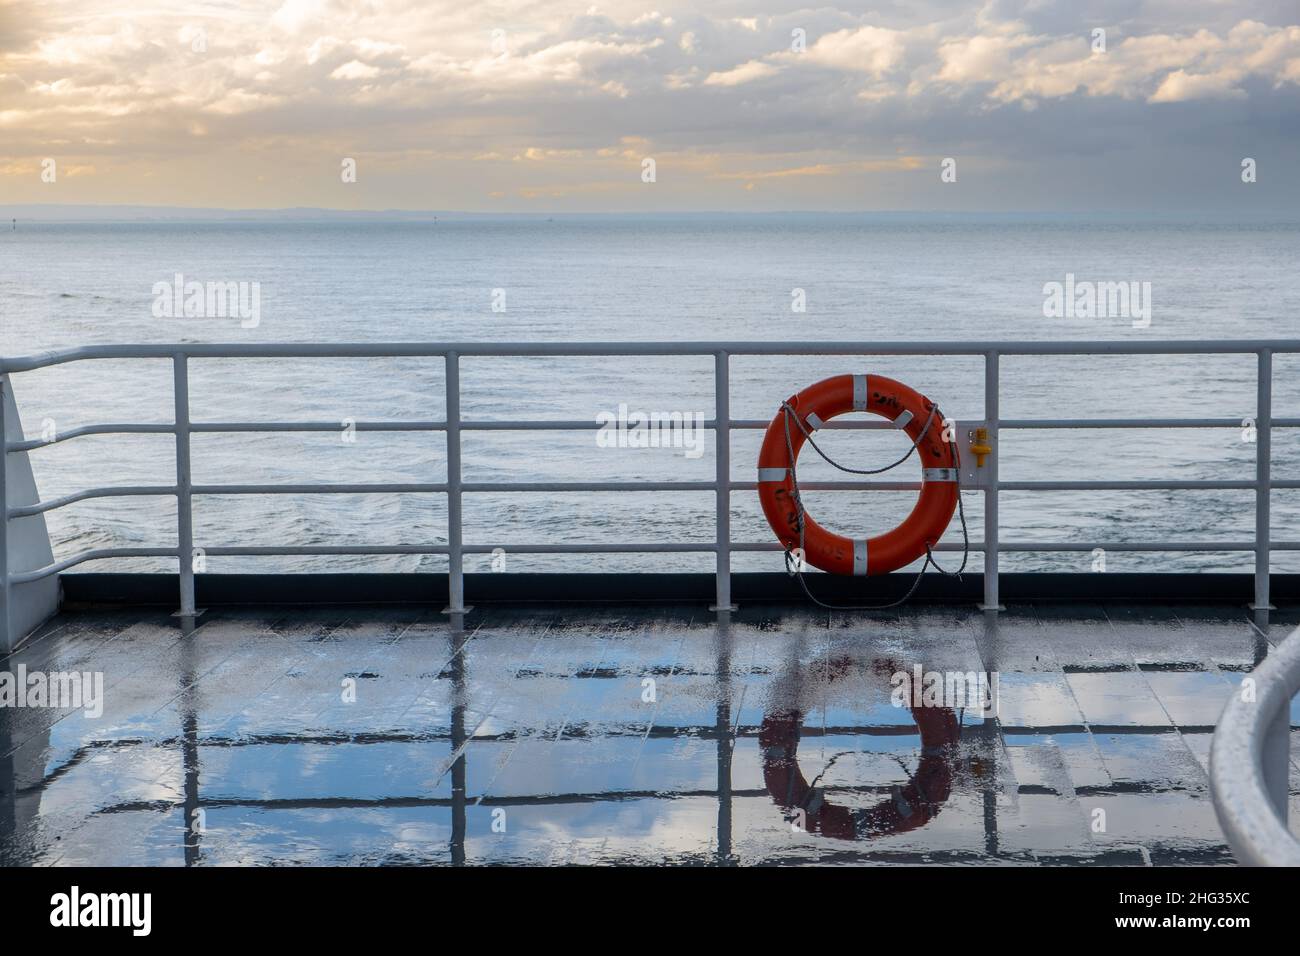 Lifebuoy reflecting in a wet ferry deck at sunset Stock Photo